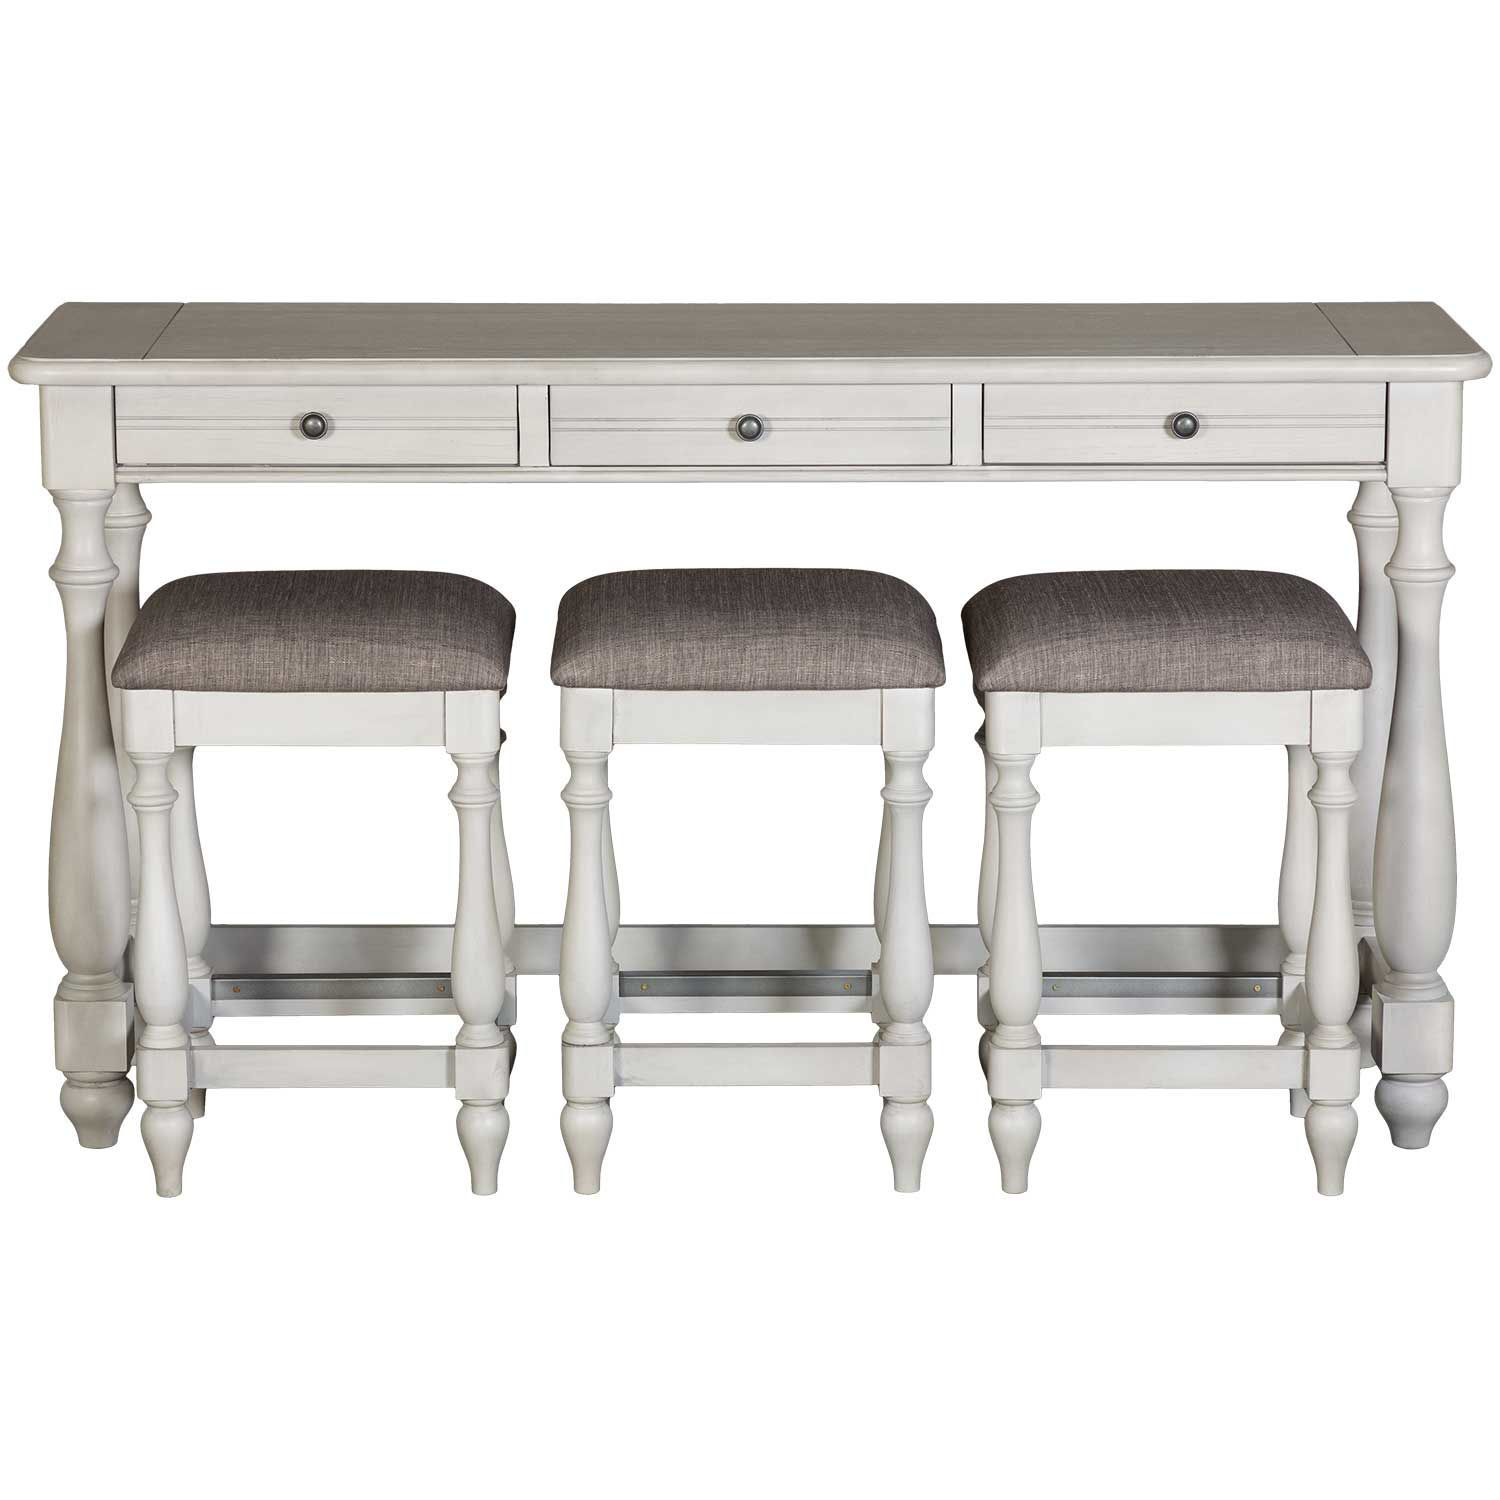 New Haven Sofa Table With Stools T330